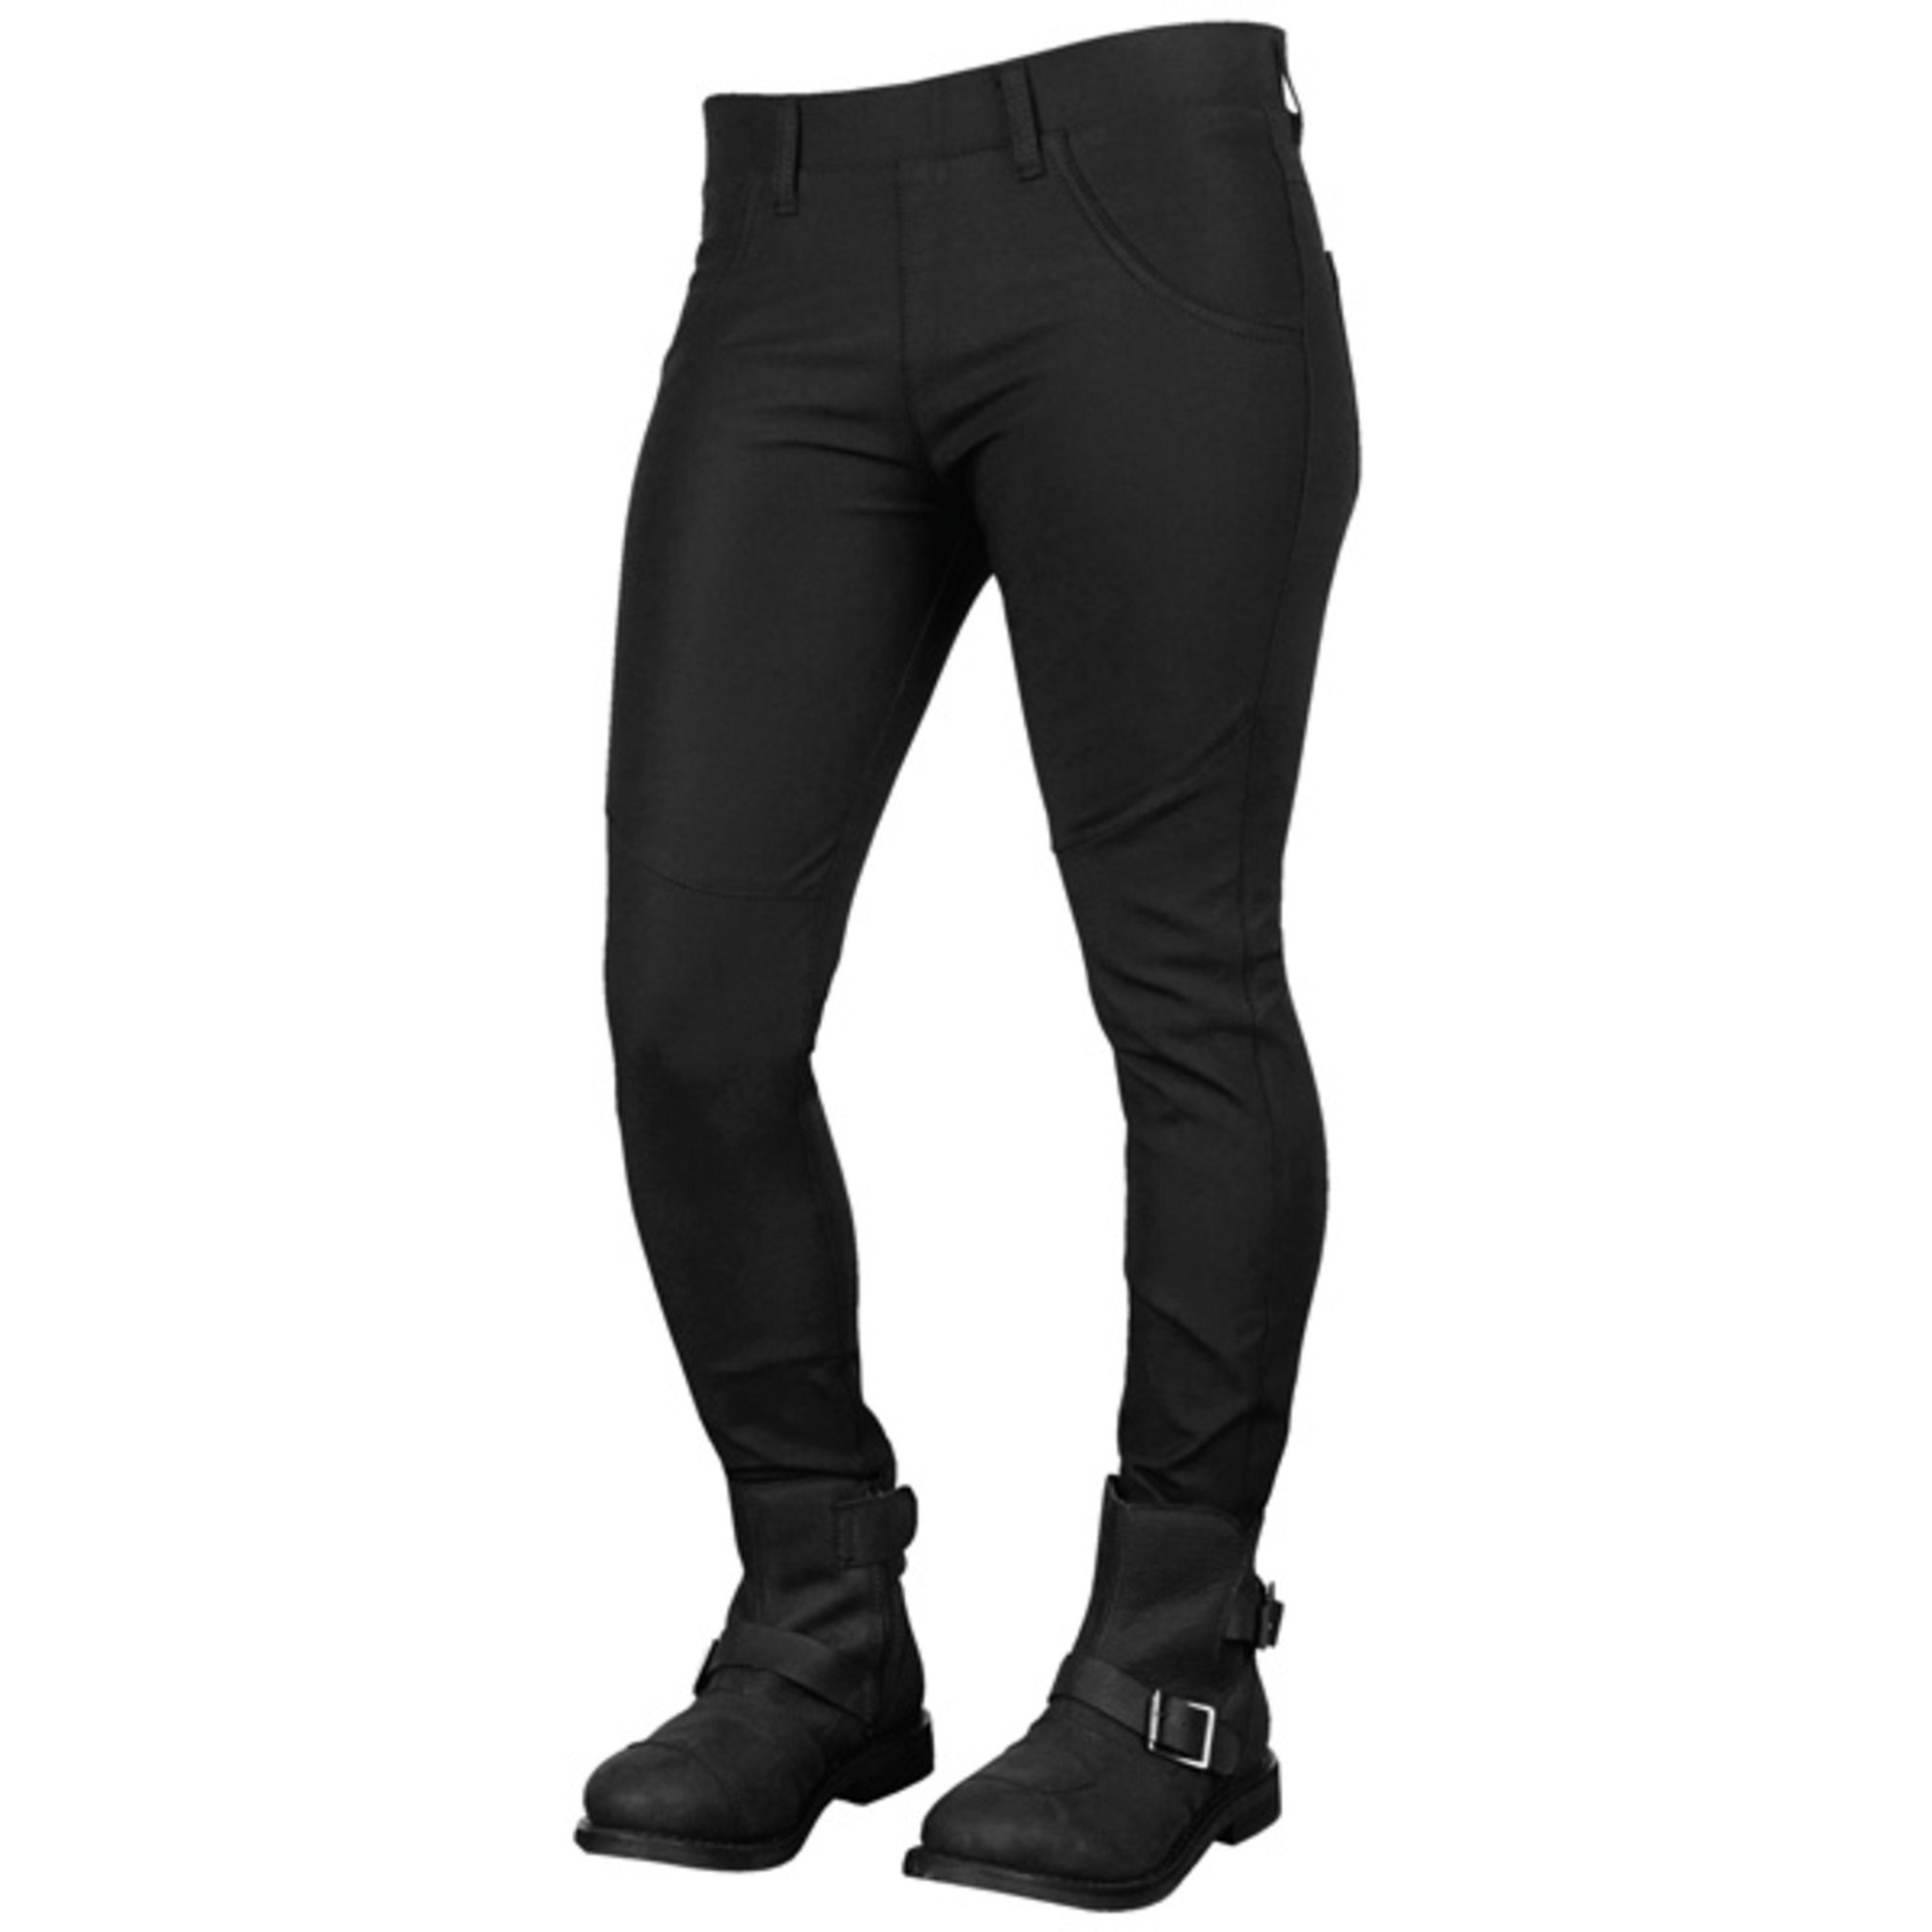 moto pantalons textile par speed and strength pour femmes comin in hot yoga